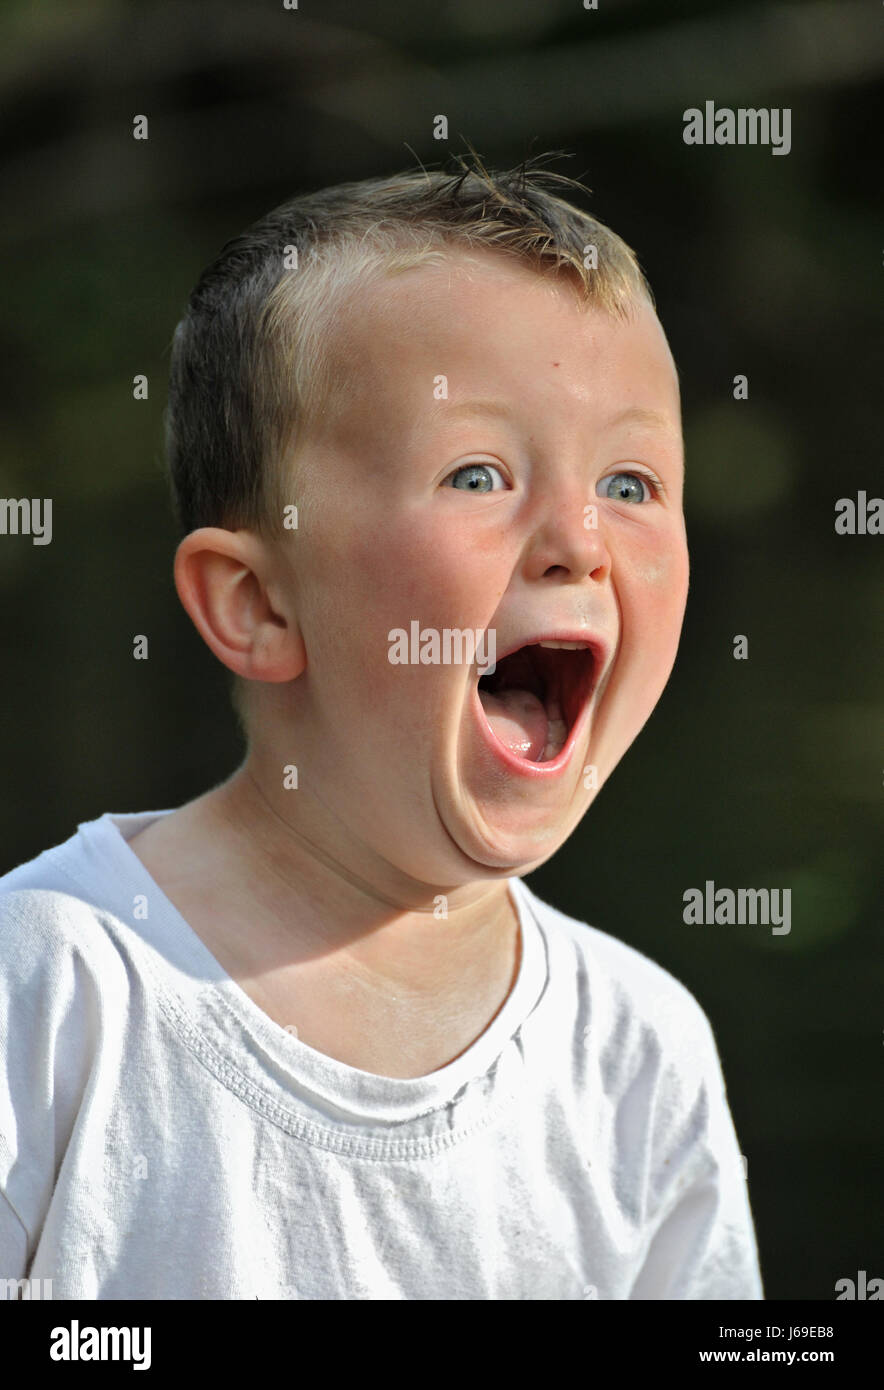 fear shock weep cry crying weeper weeping surprise boy lad male youngster child Stock Photo